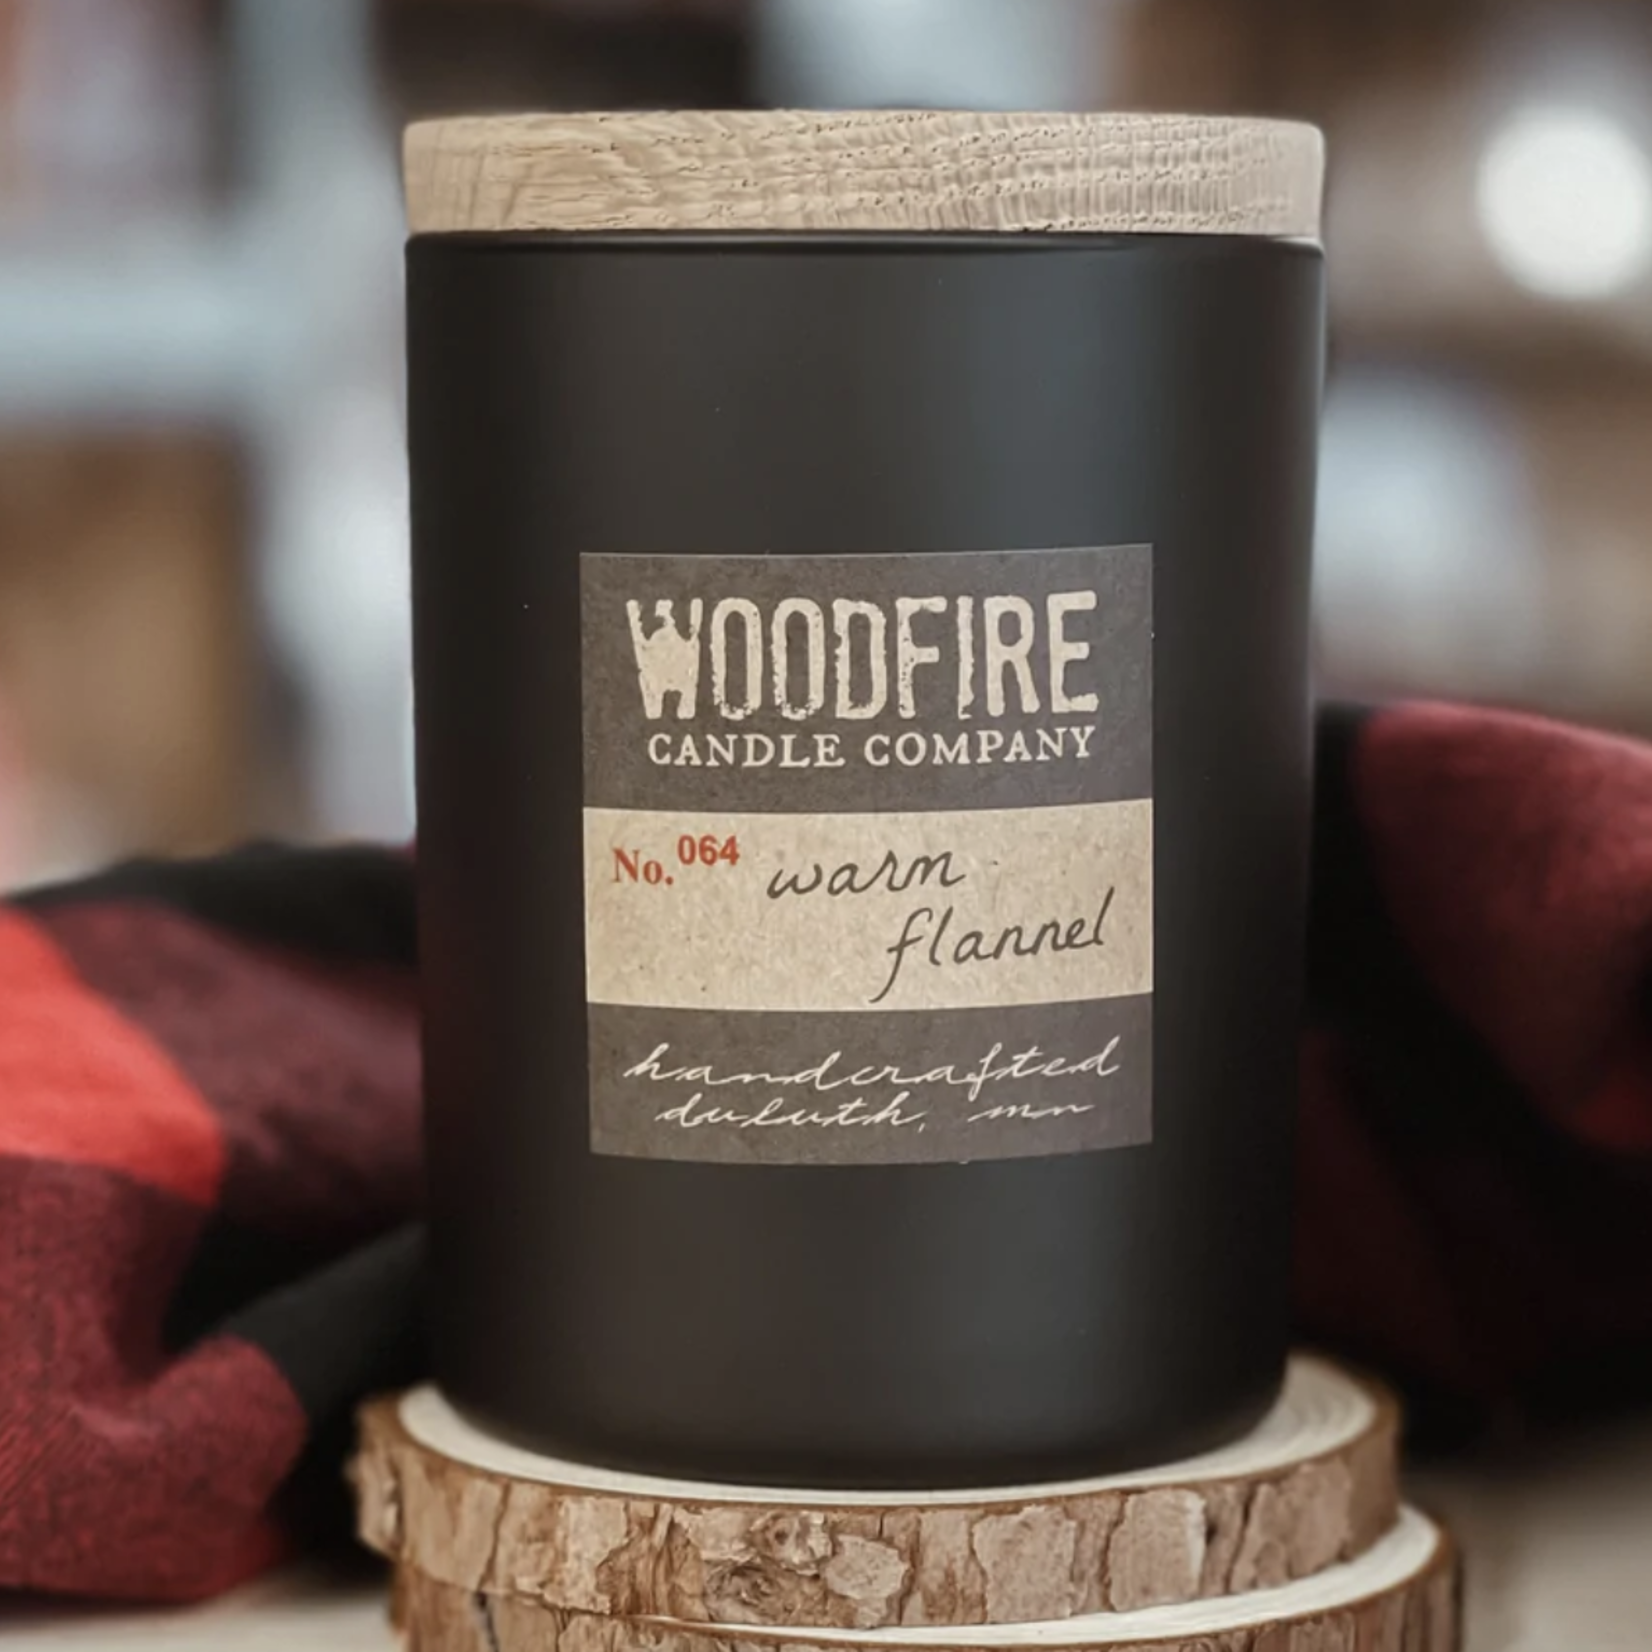 Woodfire Candle Co Woodfire Candle, Matte Black